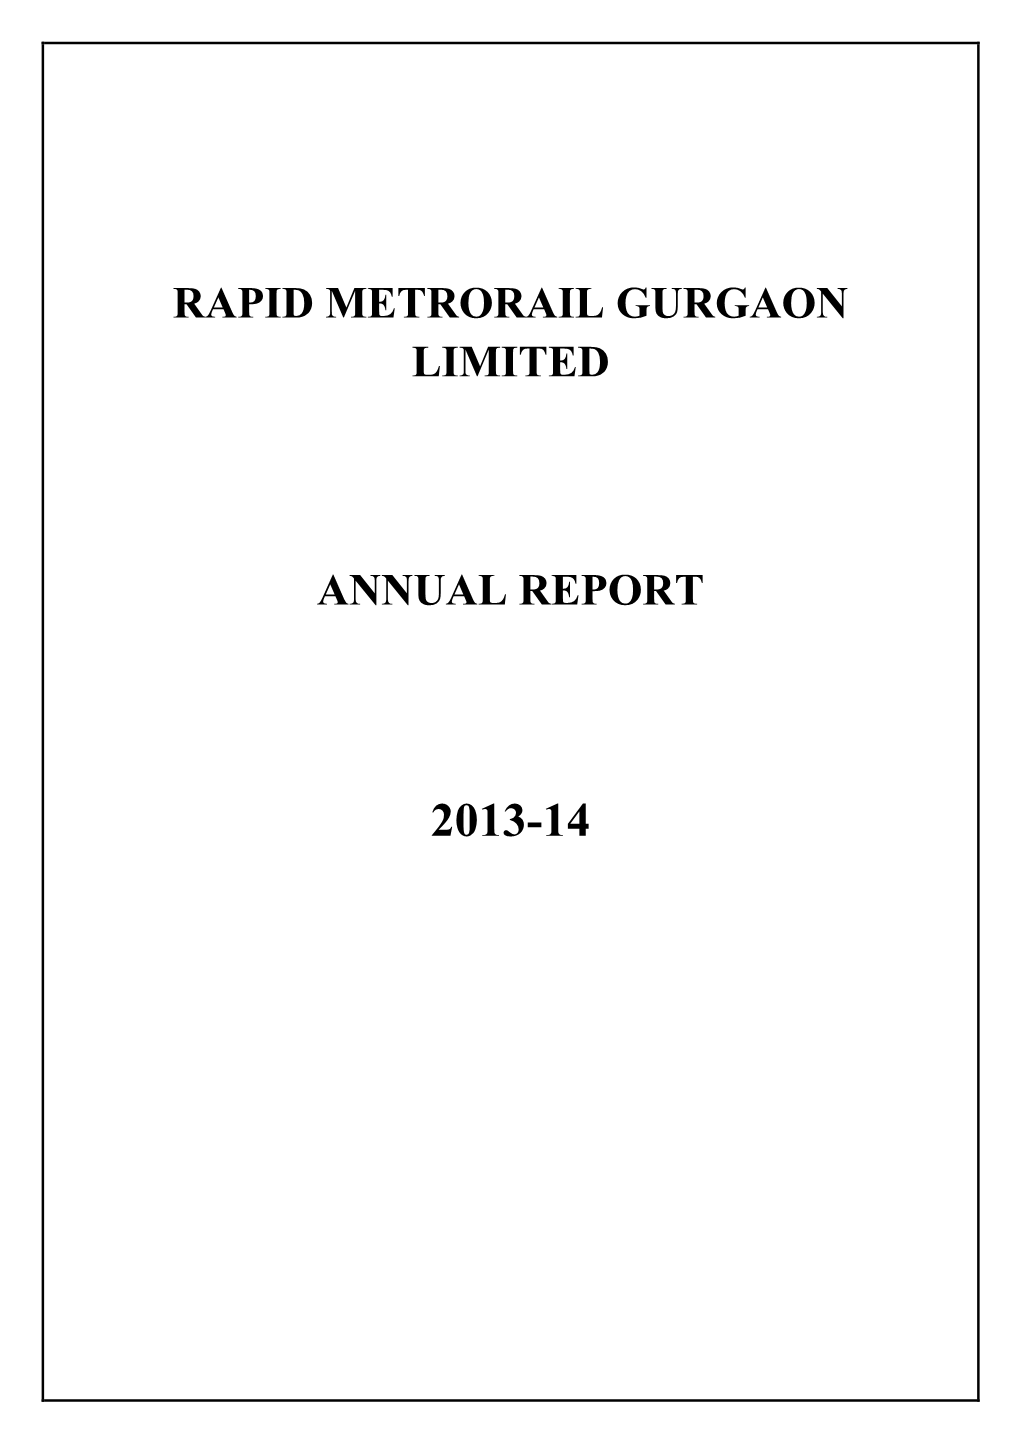 Rapid Metrorail Gurgaon Limited Annual Report 2013-14 5Th Annual Report Financial Year Ended on 31St March 2014